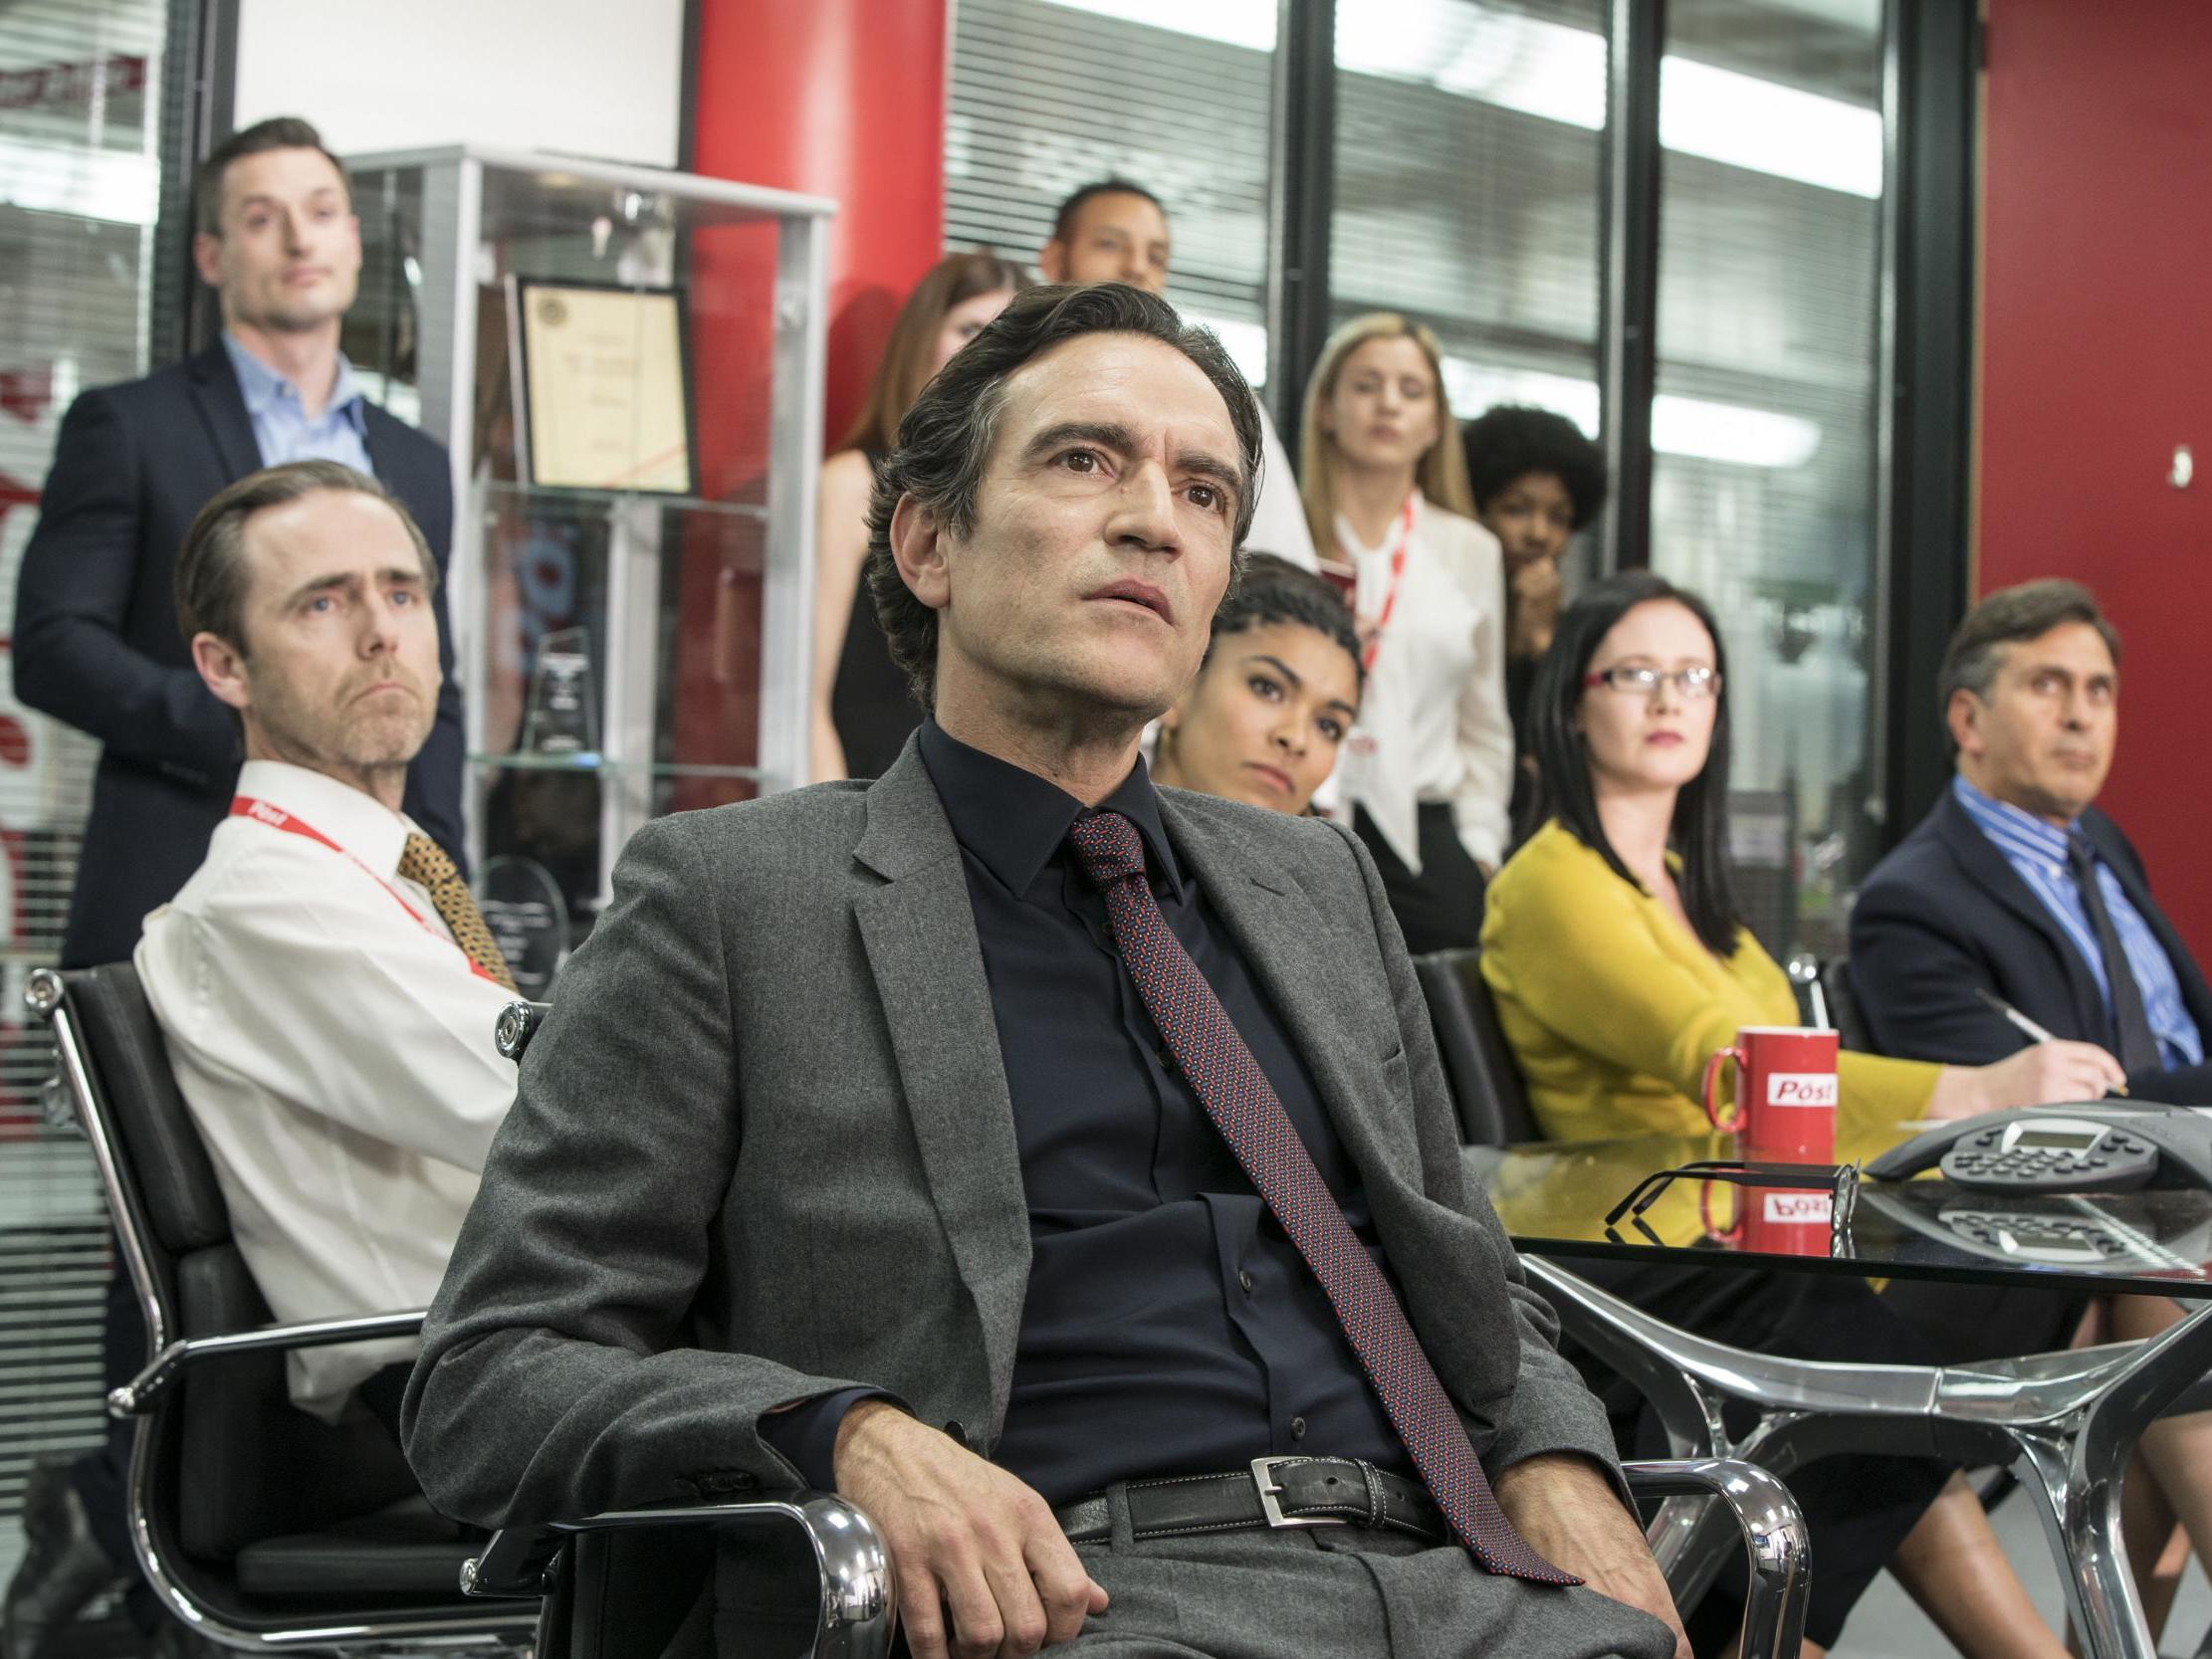 Ben Chaplin plays the hard-bitten editor of The Post in the BBC’s latest offering